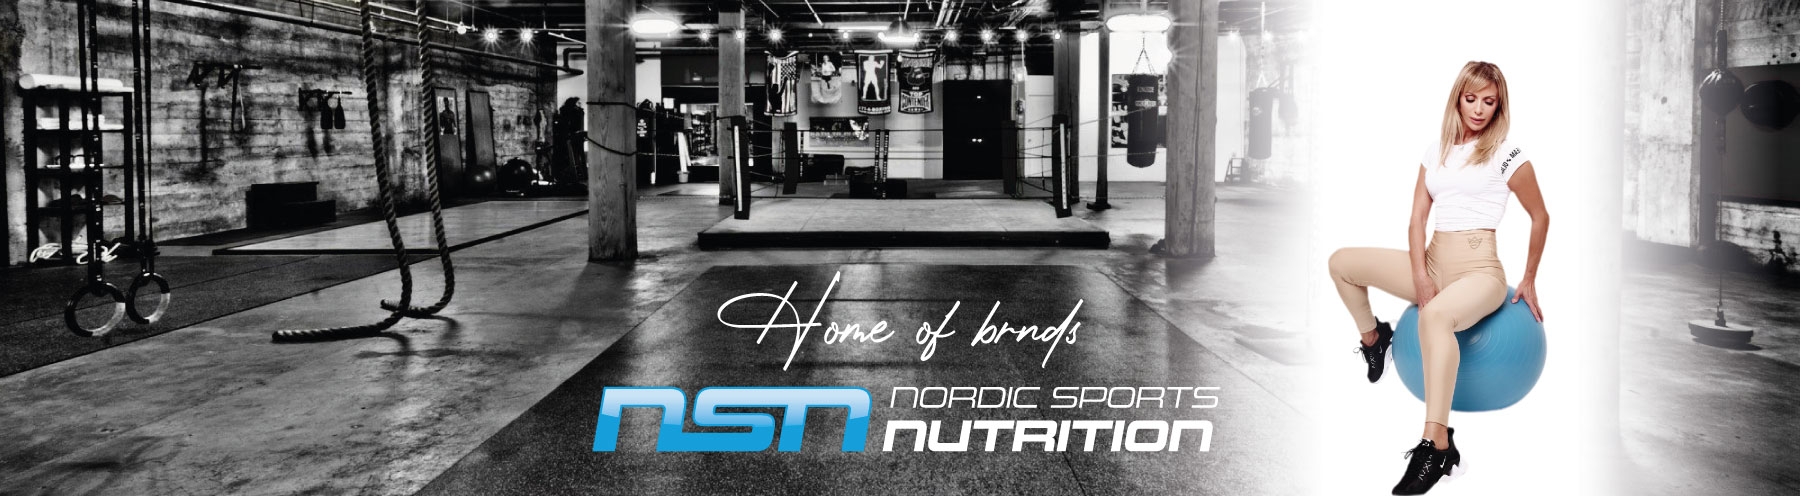 nordic sports nutrition